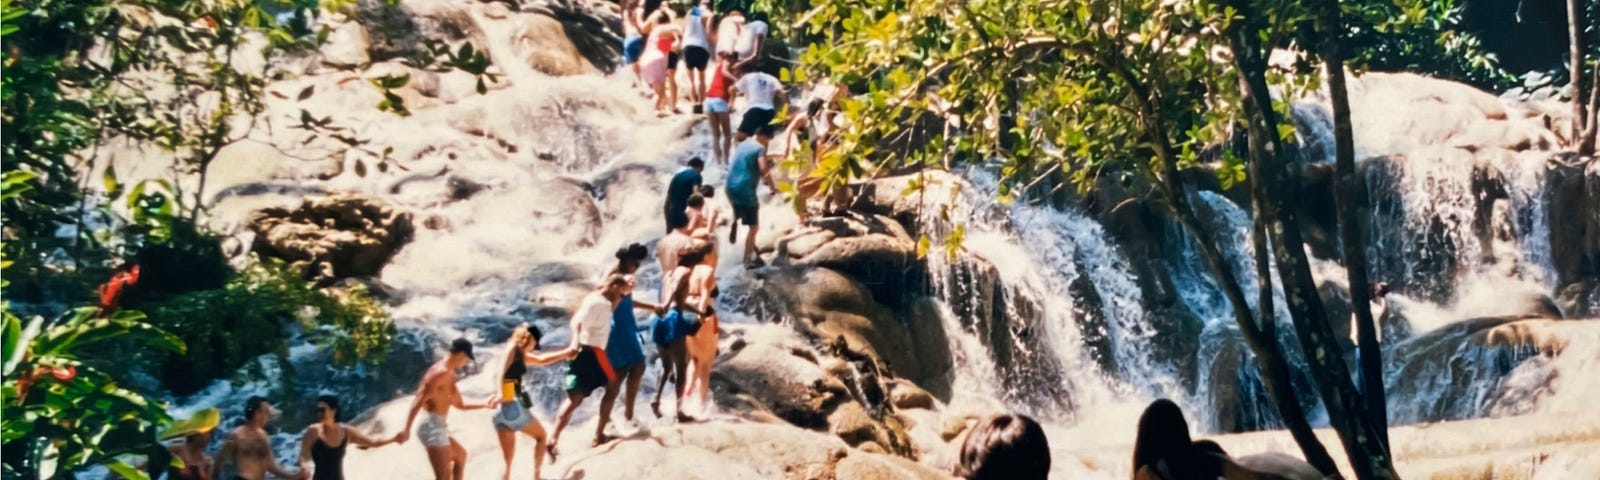 A human chain forms to climb world-famous Dunn’s River Falls in Jamaica | nature photography | © pockett dessert.